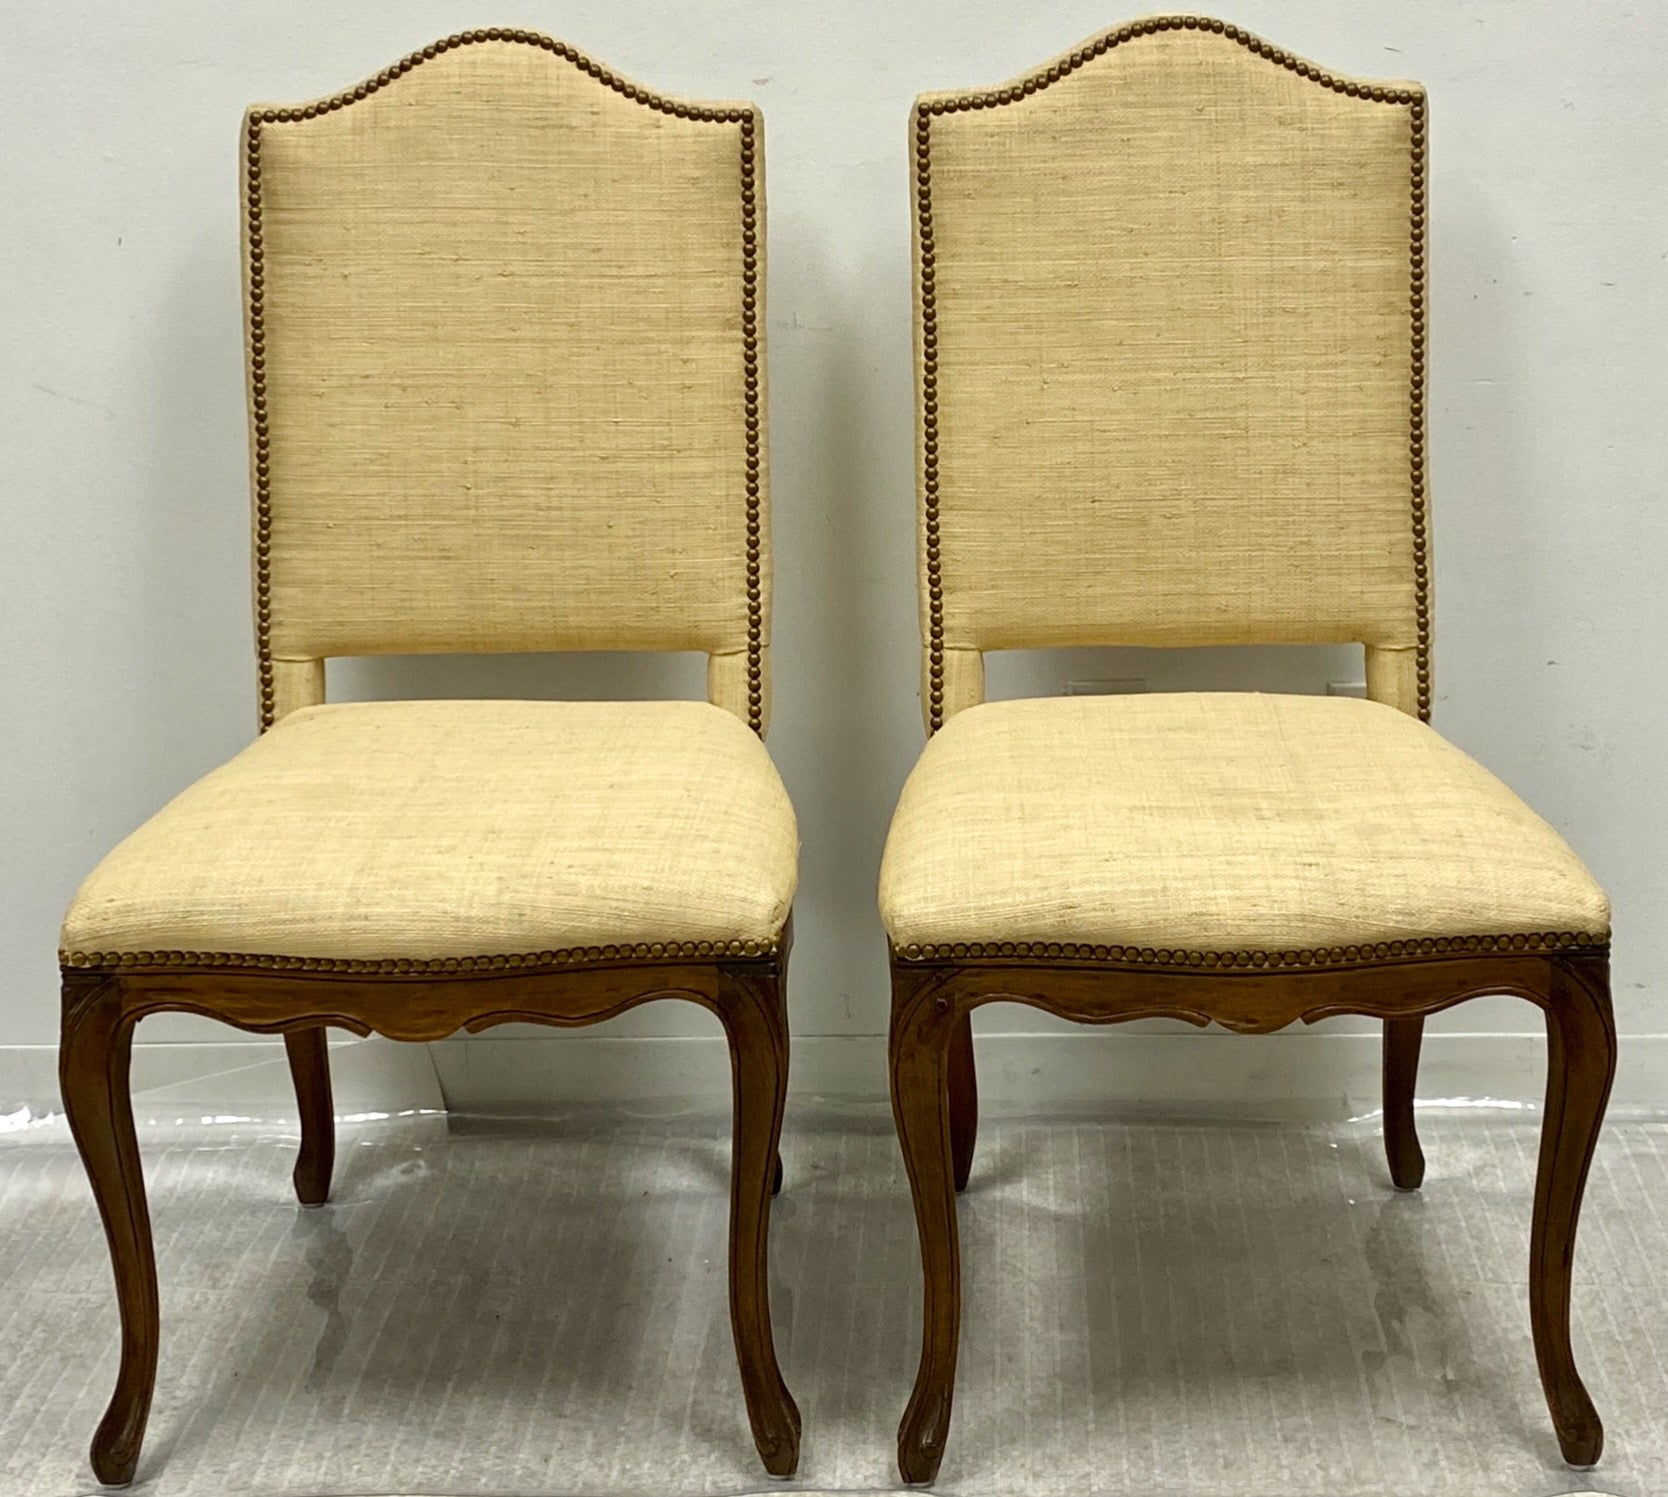 This is a pair of French Louis XV style side chairs wrapped in grasscloth with plaid backs and applied brass nailheads. They are attributed to Grange and most likely date to the later part of the 20th century. They are in very good condition. 